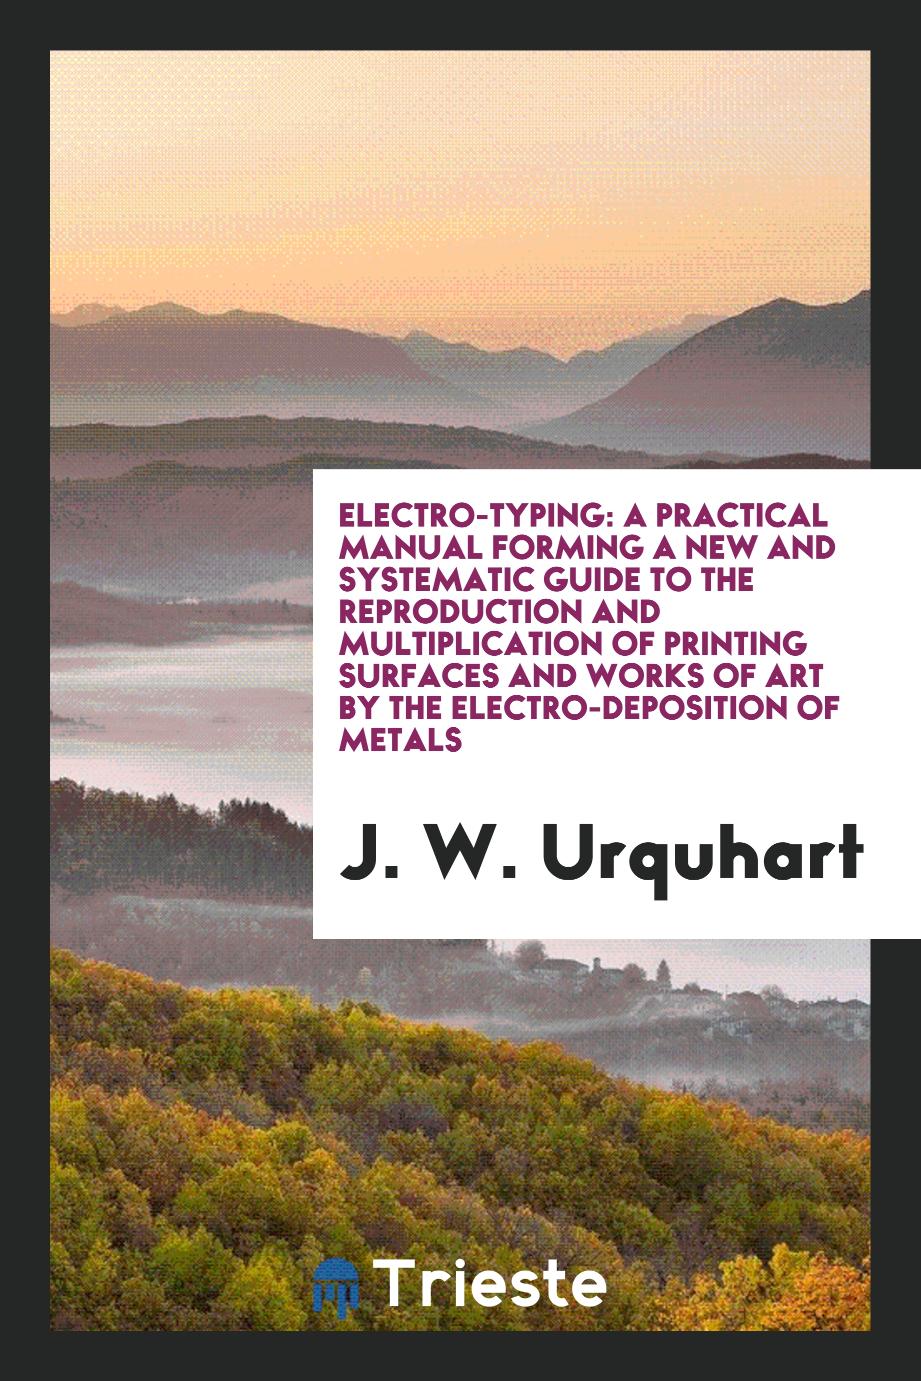 Electro-typing: a practical manual forming a new and systematic guide to the reproduction and multiplication of printing surfaces and works of art by the electro-deposition of metals